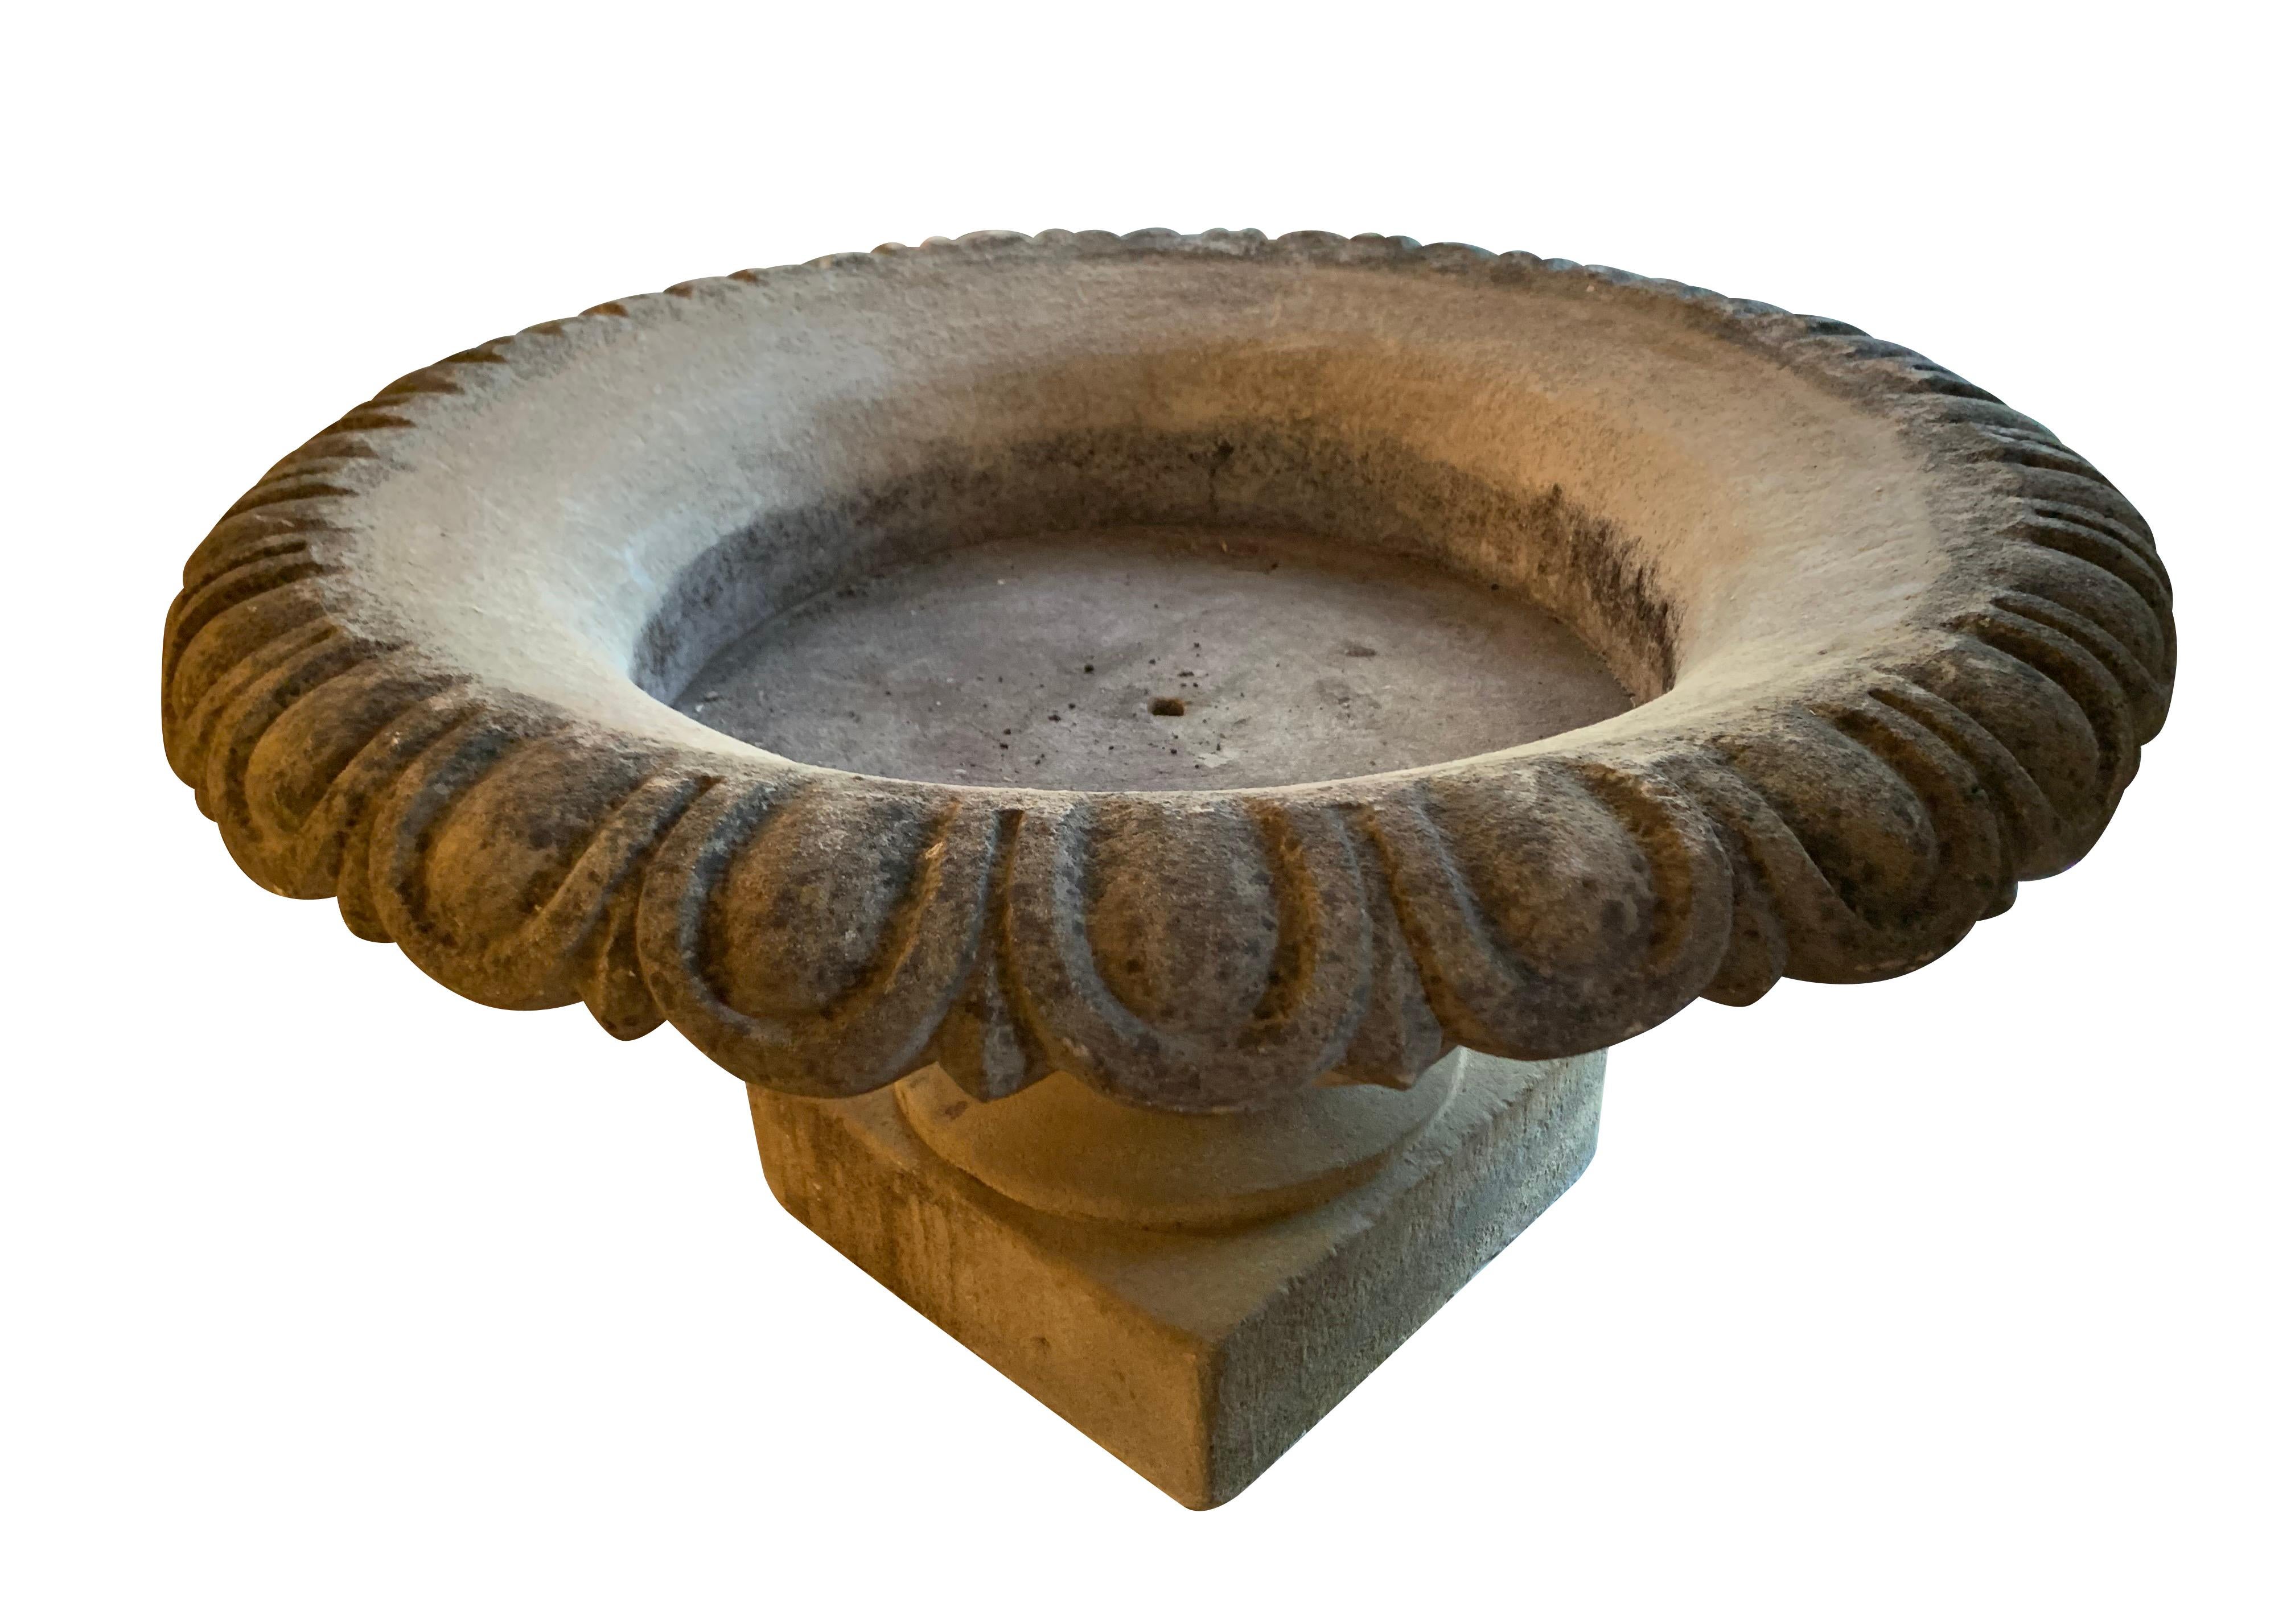 1940's English extra large composition stone garden urn.
Egham Tazza design.
Stone is embedded with spores and lichen creating natural aged patina.
Base measures 19 x 19
6